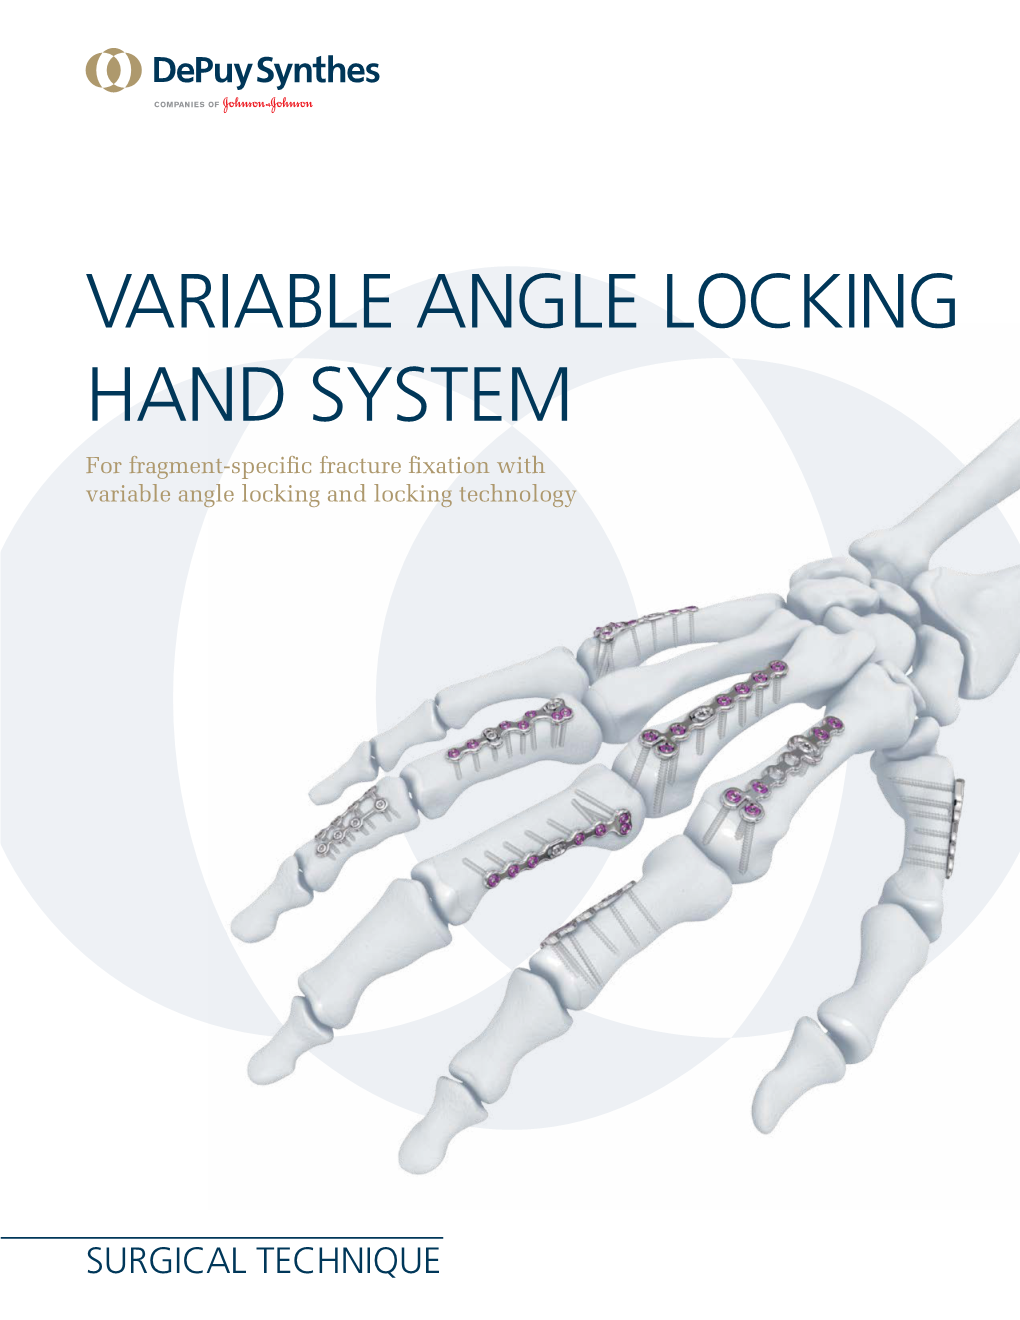 VARIABLE ANGLE LOCKING HAND SYSTEM for Fragment-Specific Fracture Fixation with Variable Angle Locking and Locking Technology